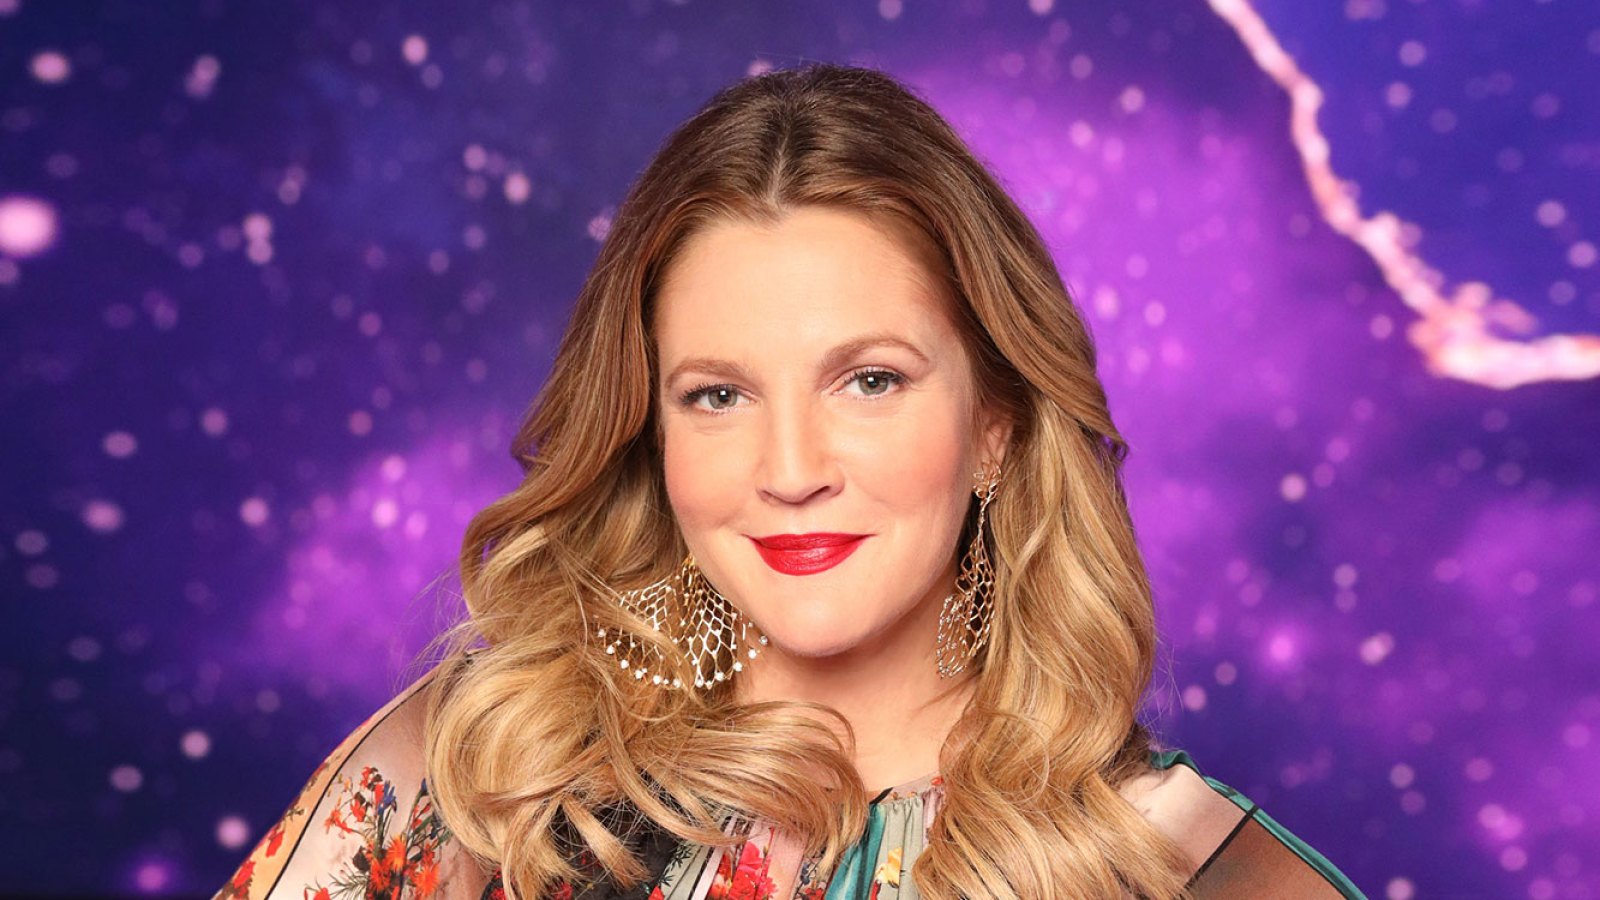 Drew Barrymore on What Makes The World's Best the Best